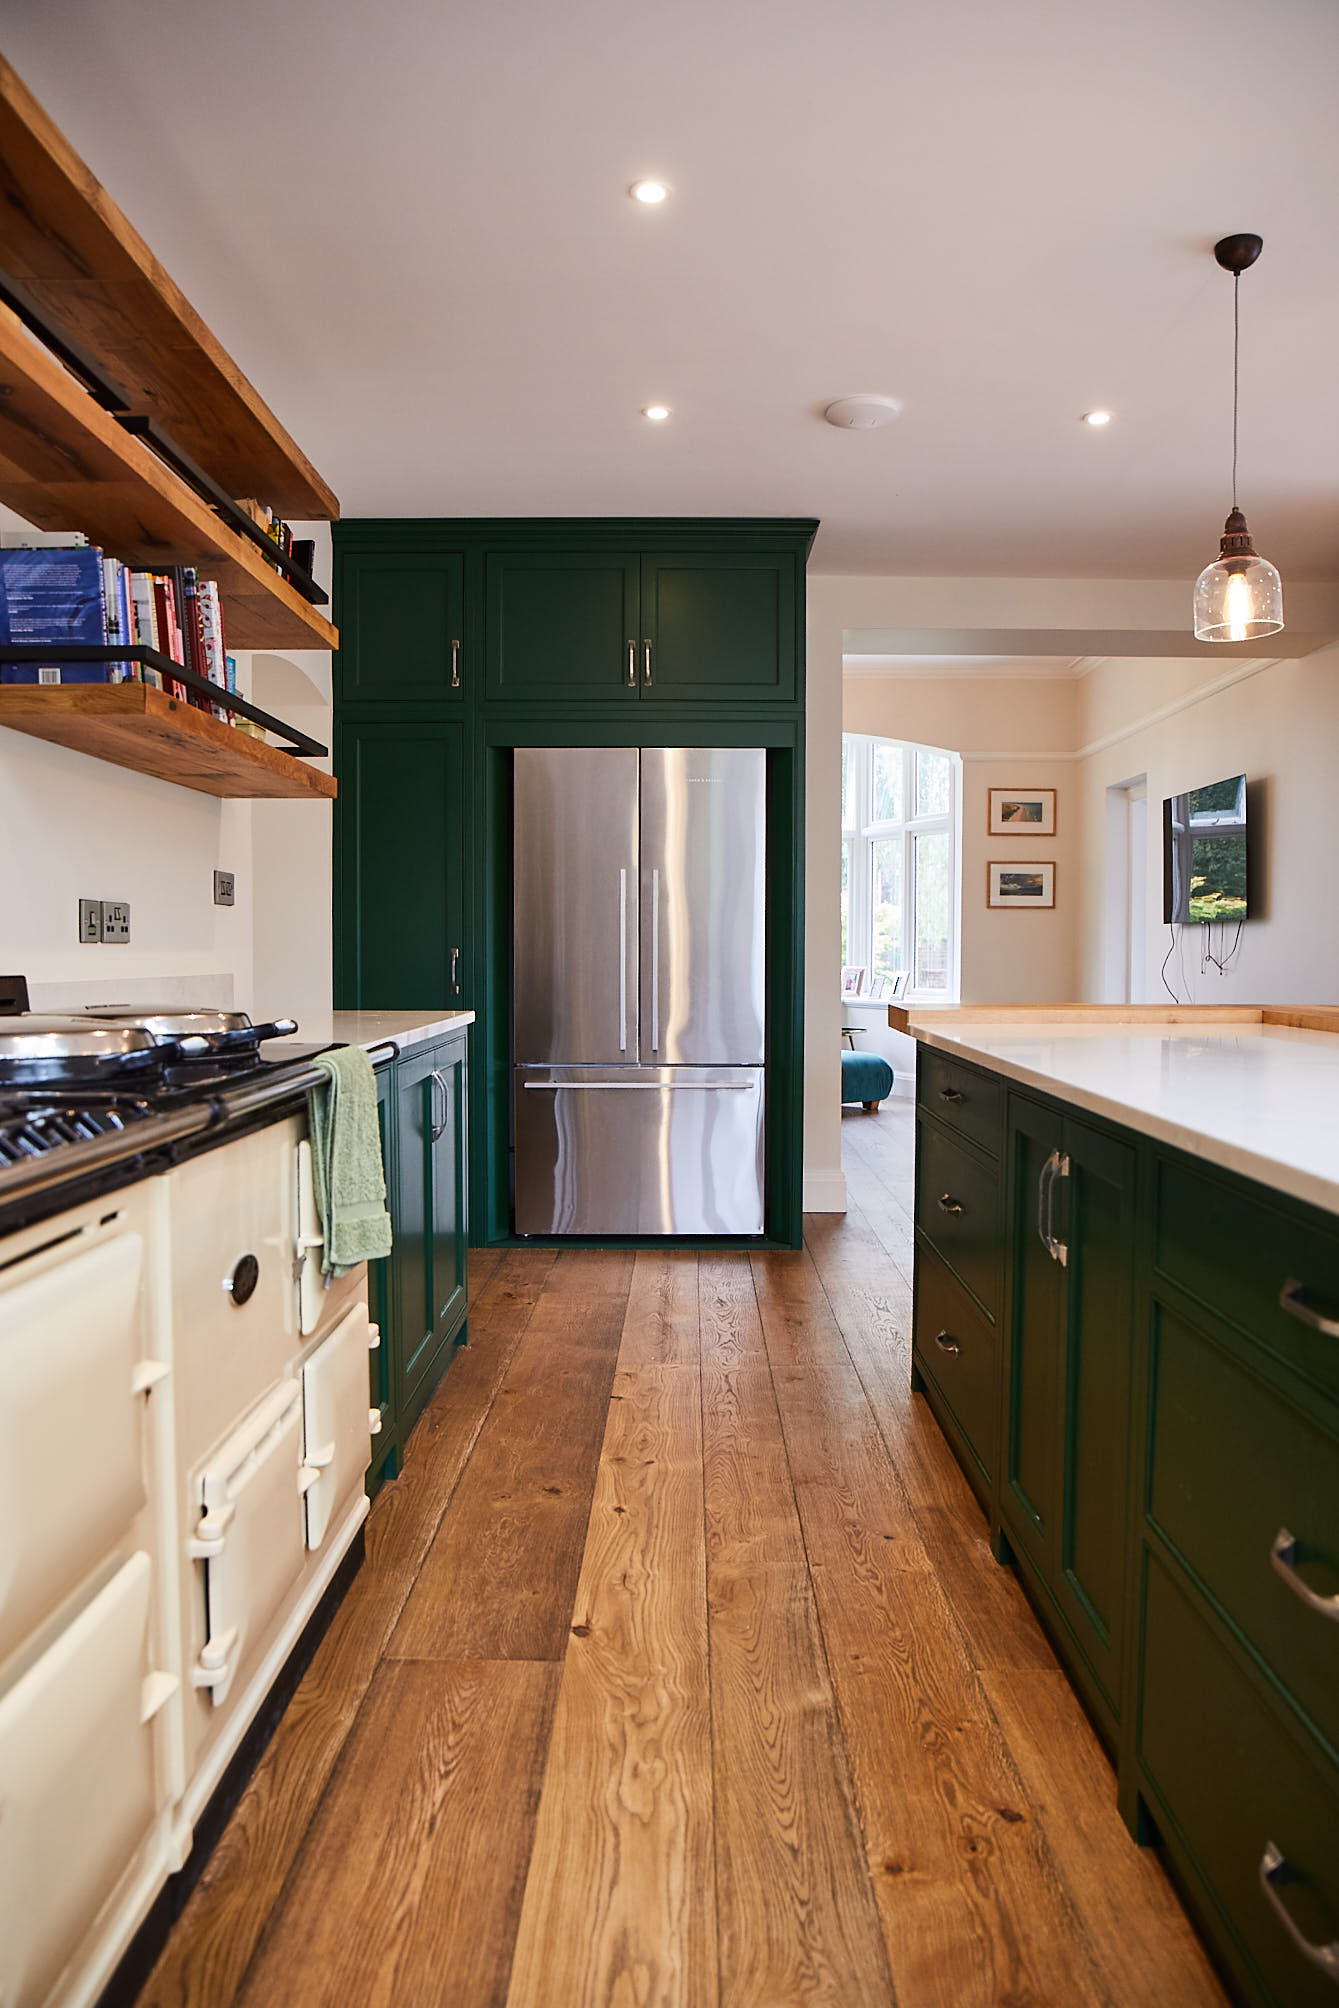 Fisher Paykel American fridge freezer integrated in the green bespoke kitchen cabinets